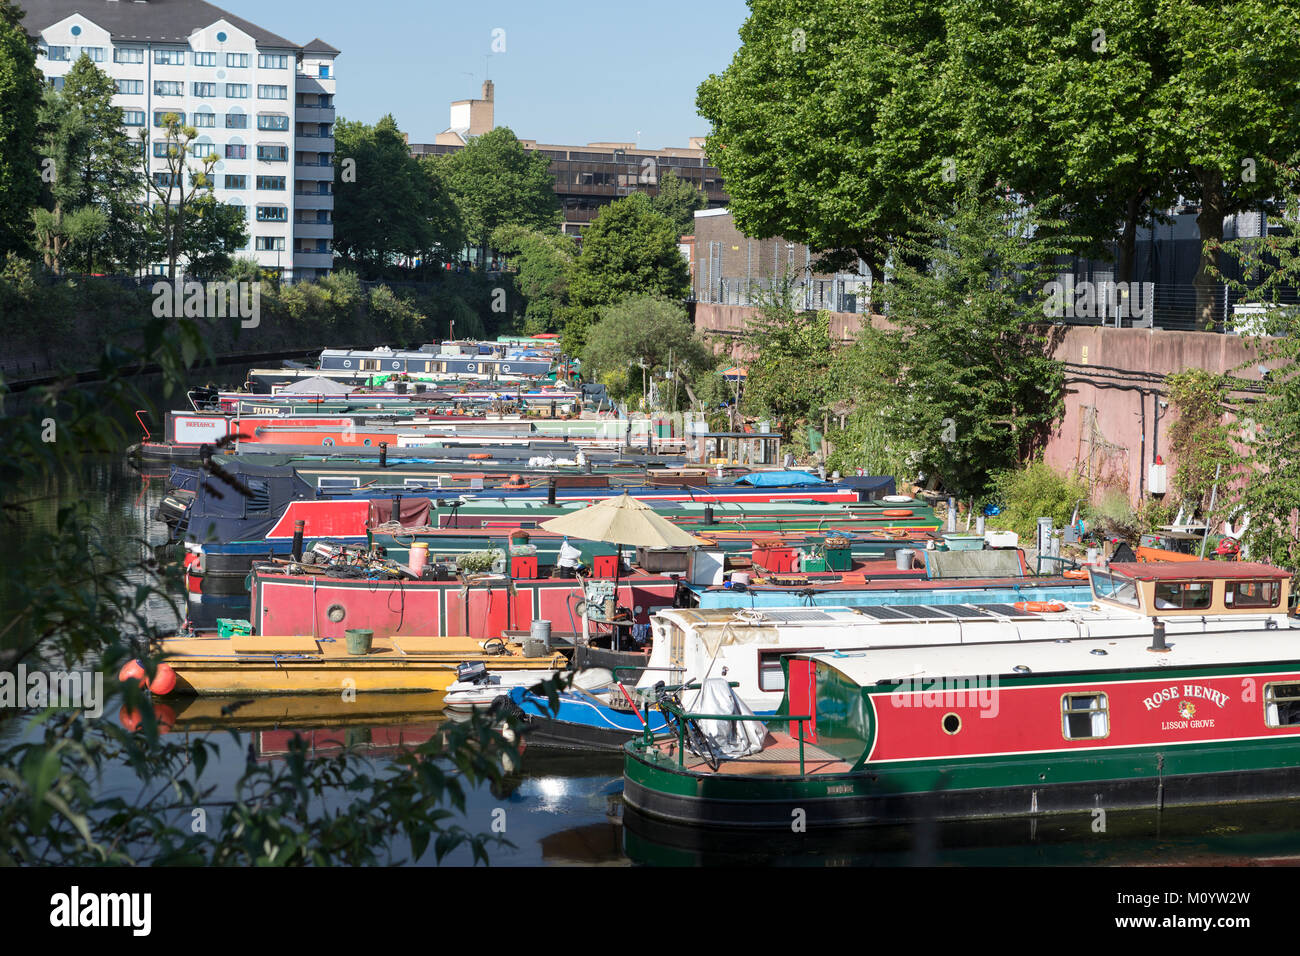 The Regents canal and moored boats at Maida vale. Stock Photo